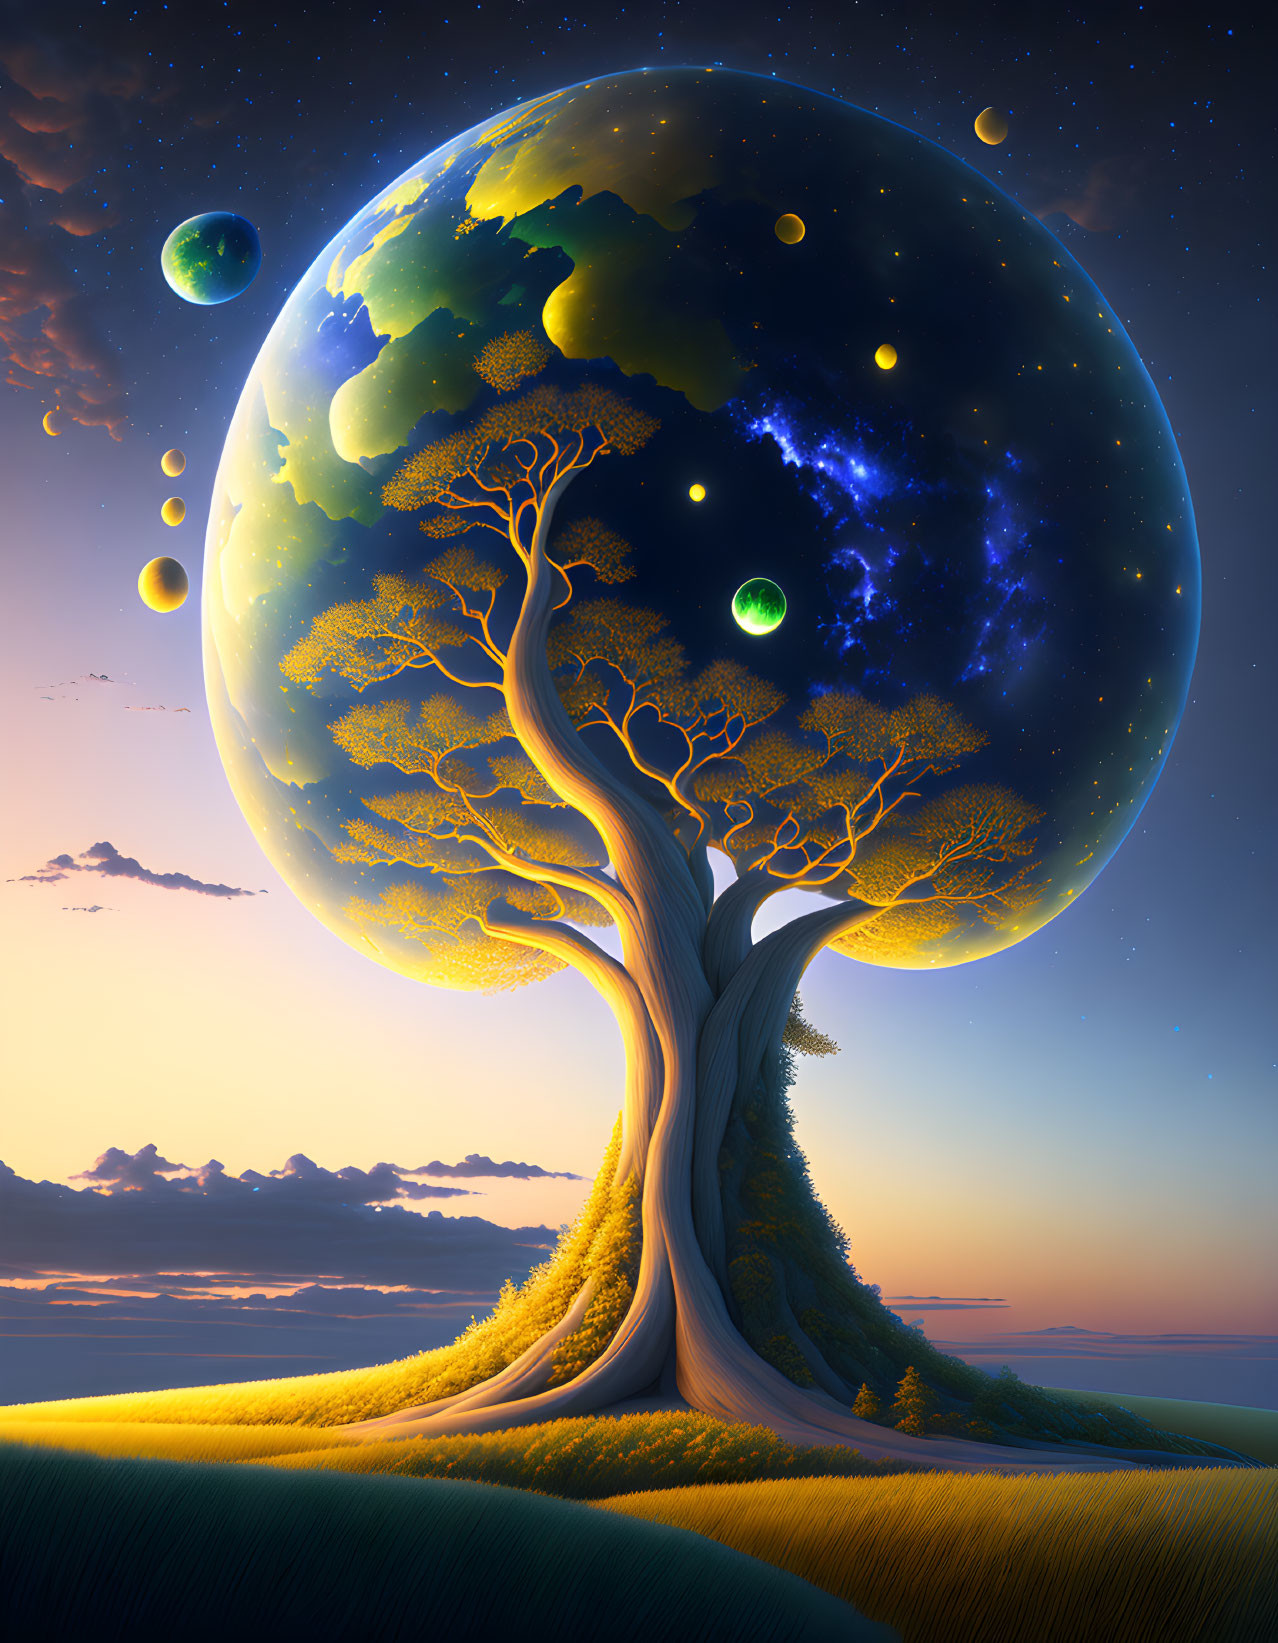 Surreal landscape with giant luminous tree and floating orbs at night